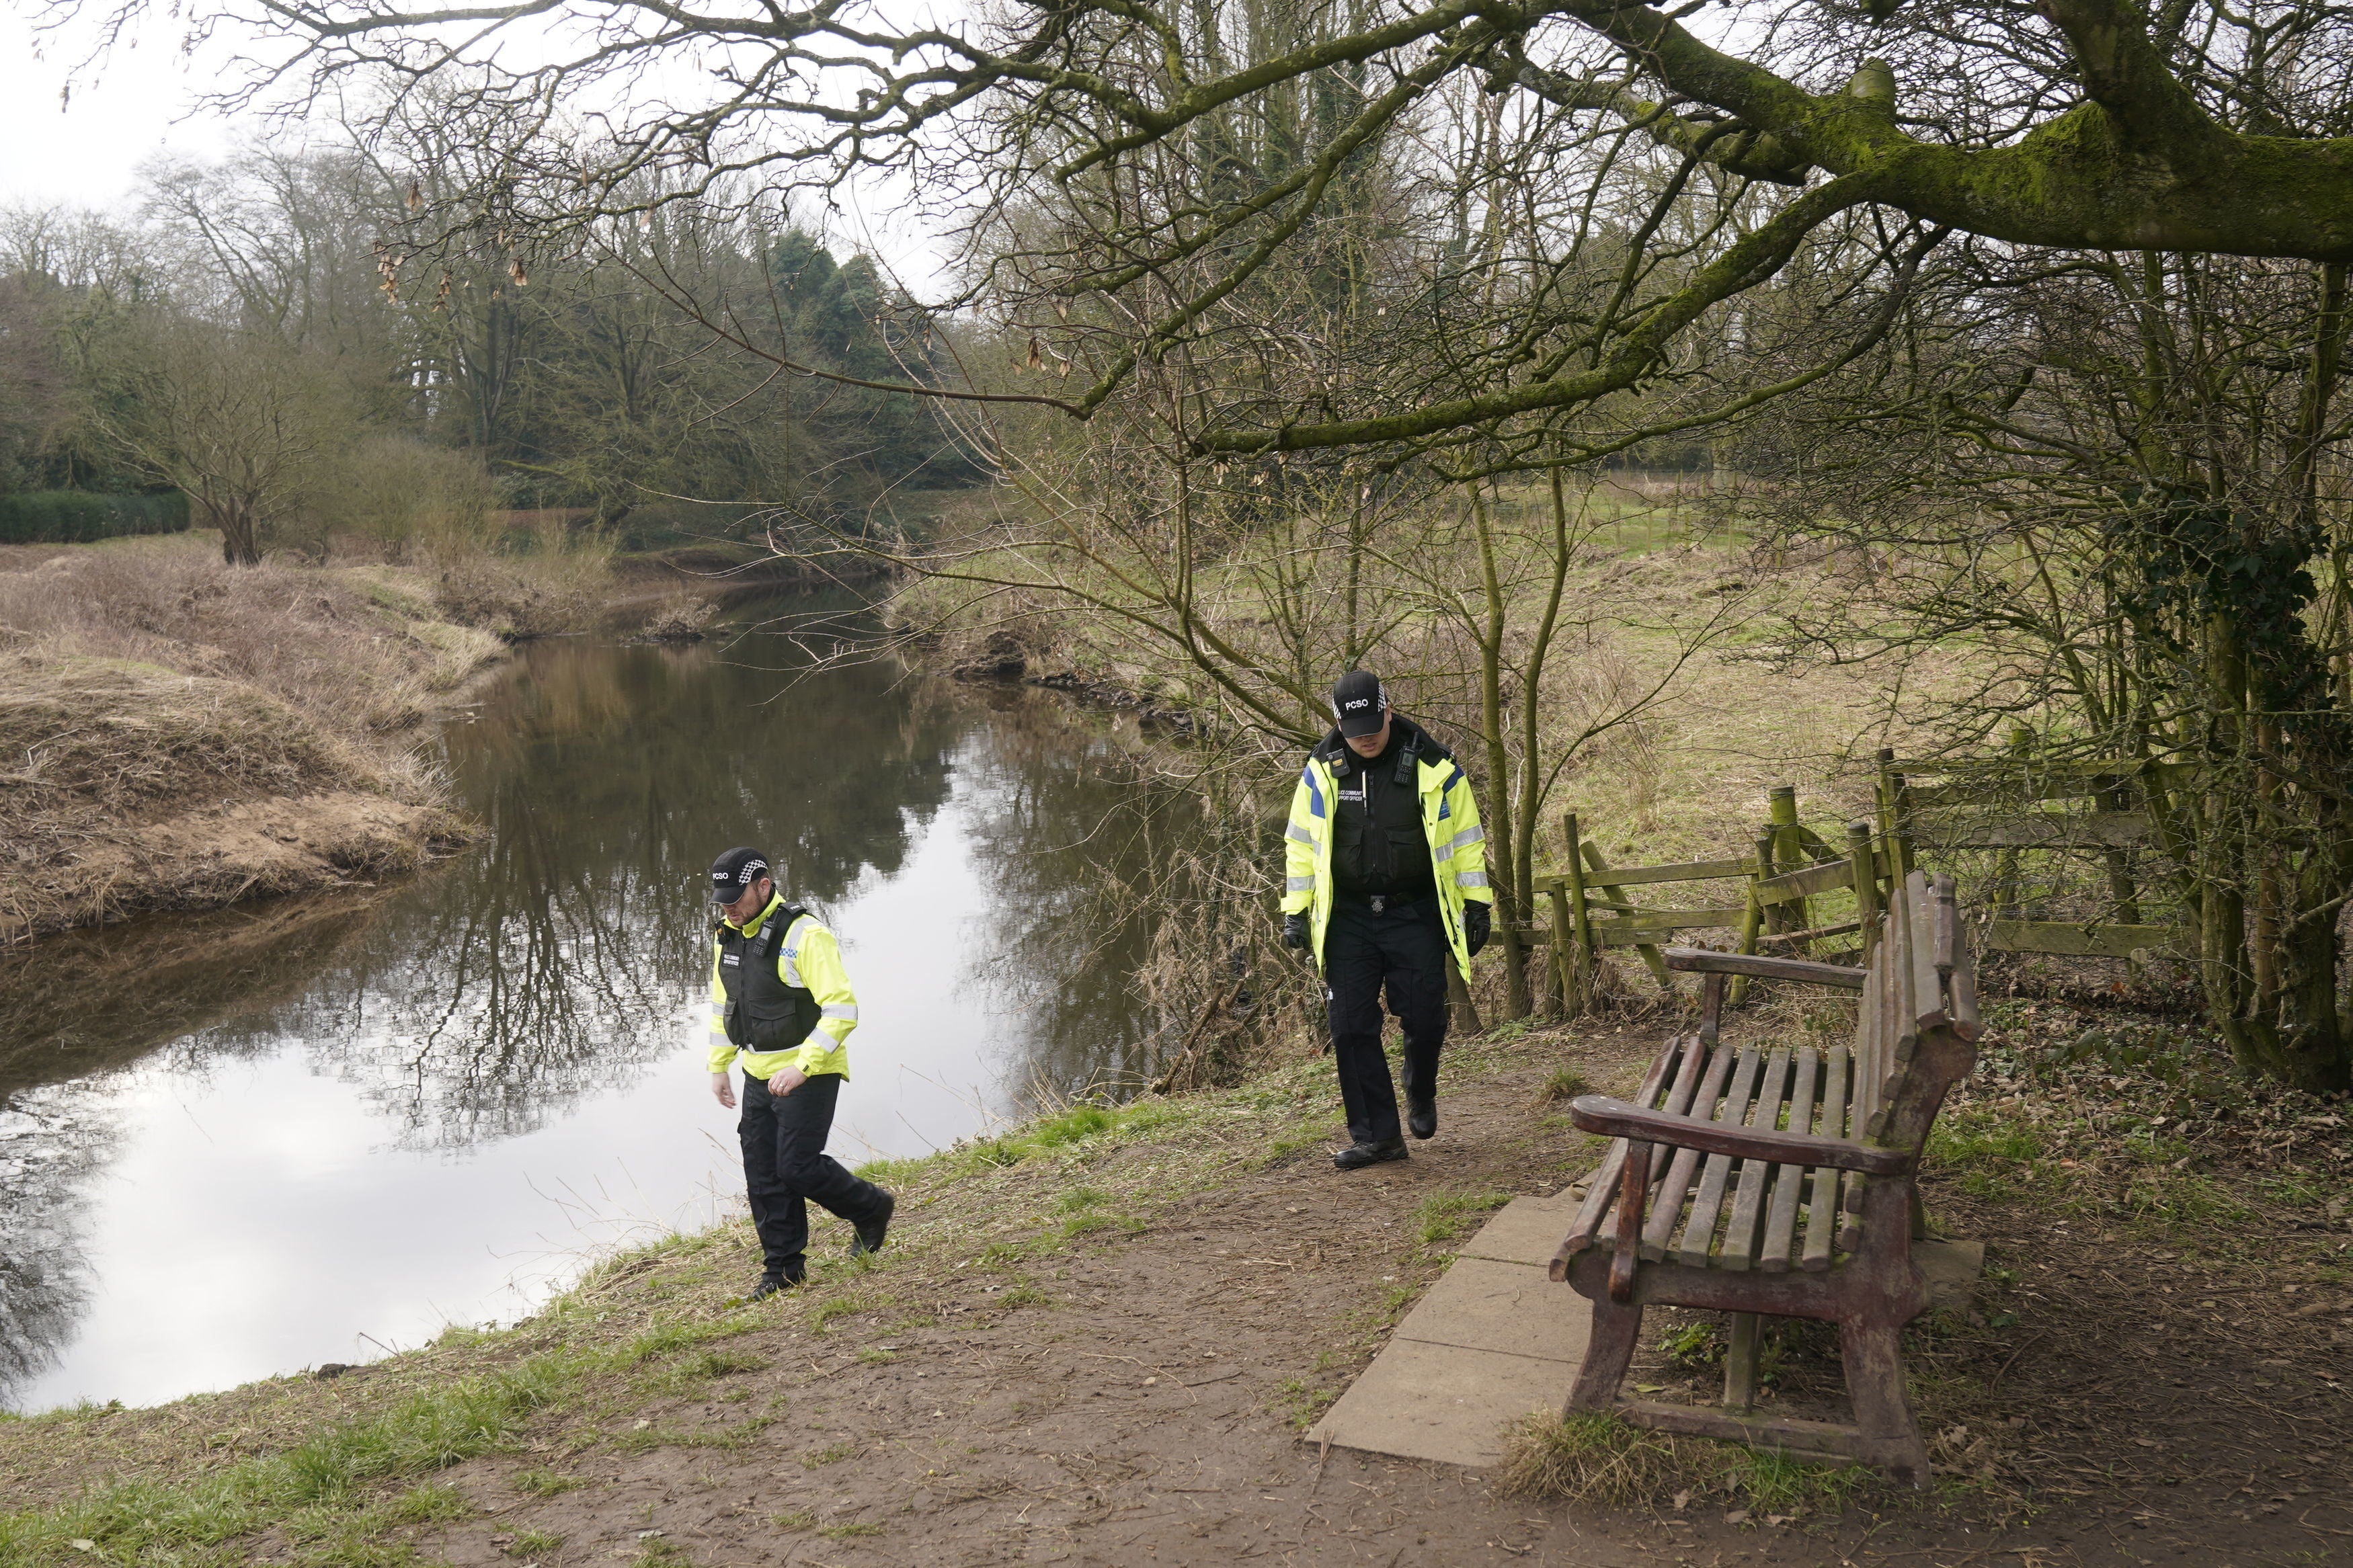 Police activity near the bench by the River Wyre in St Michael's on Wyre, Lancashire, where the mobile phone was found as police continue their search for missing woman Nicola Bulley